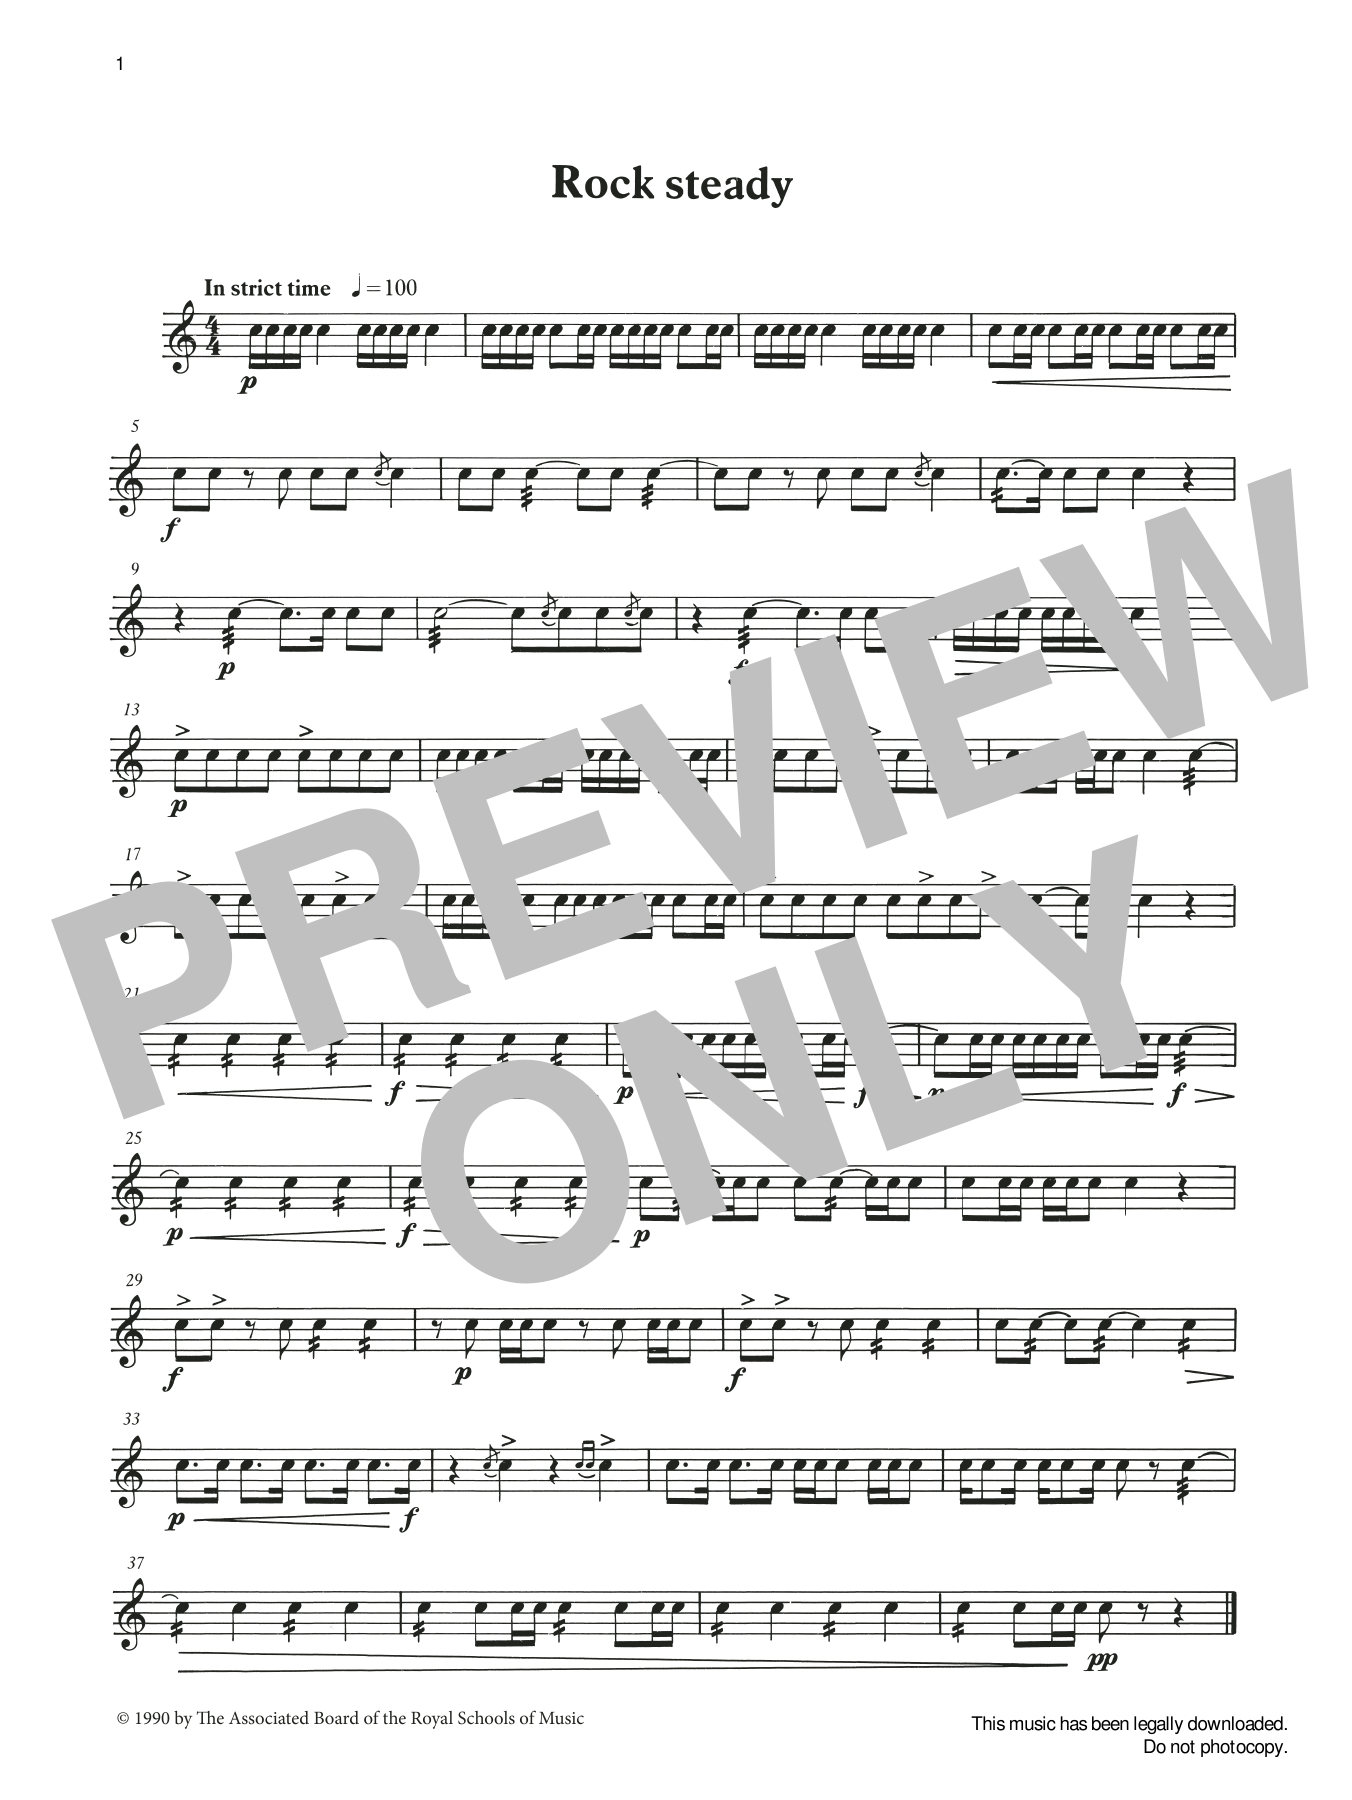 Rock Steady from Graded Music for Snare Drum, Book II (Percussion Solo) von Ian Wright and Kevin Hathaway